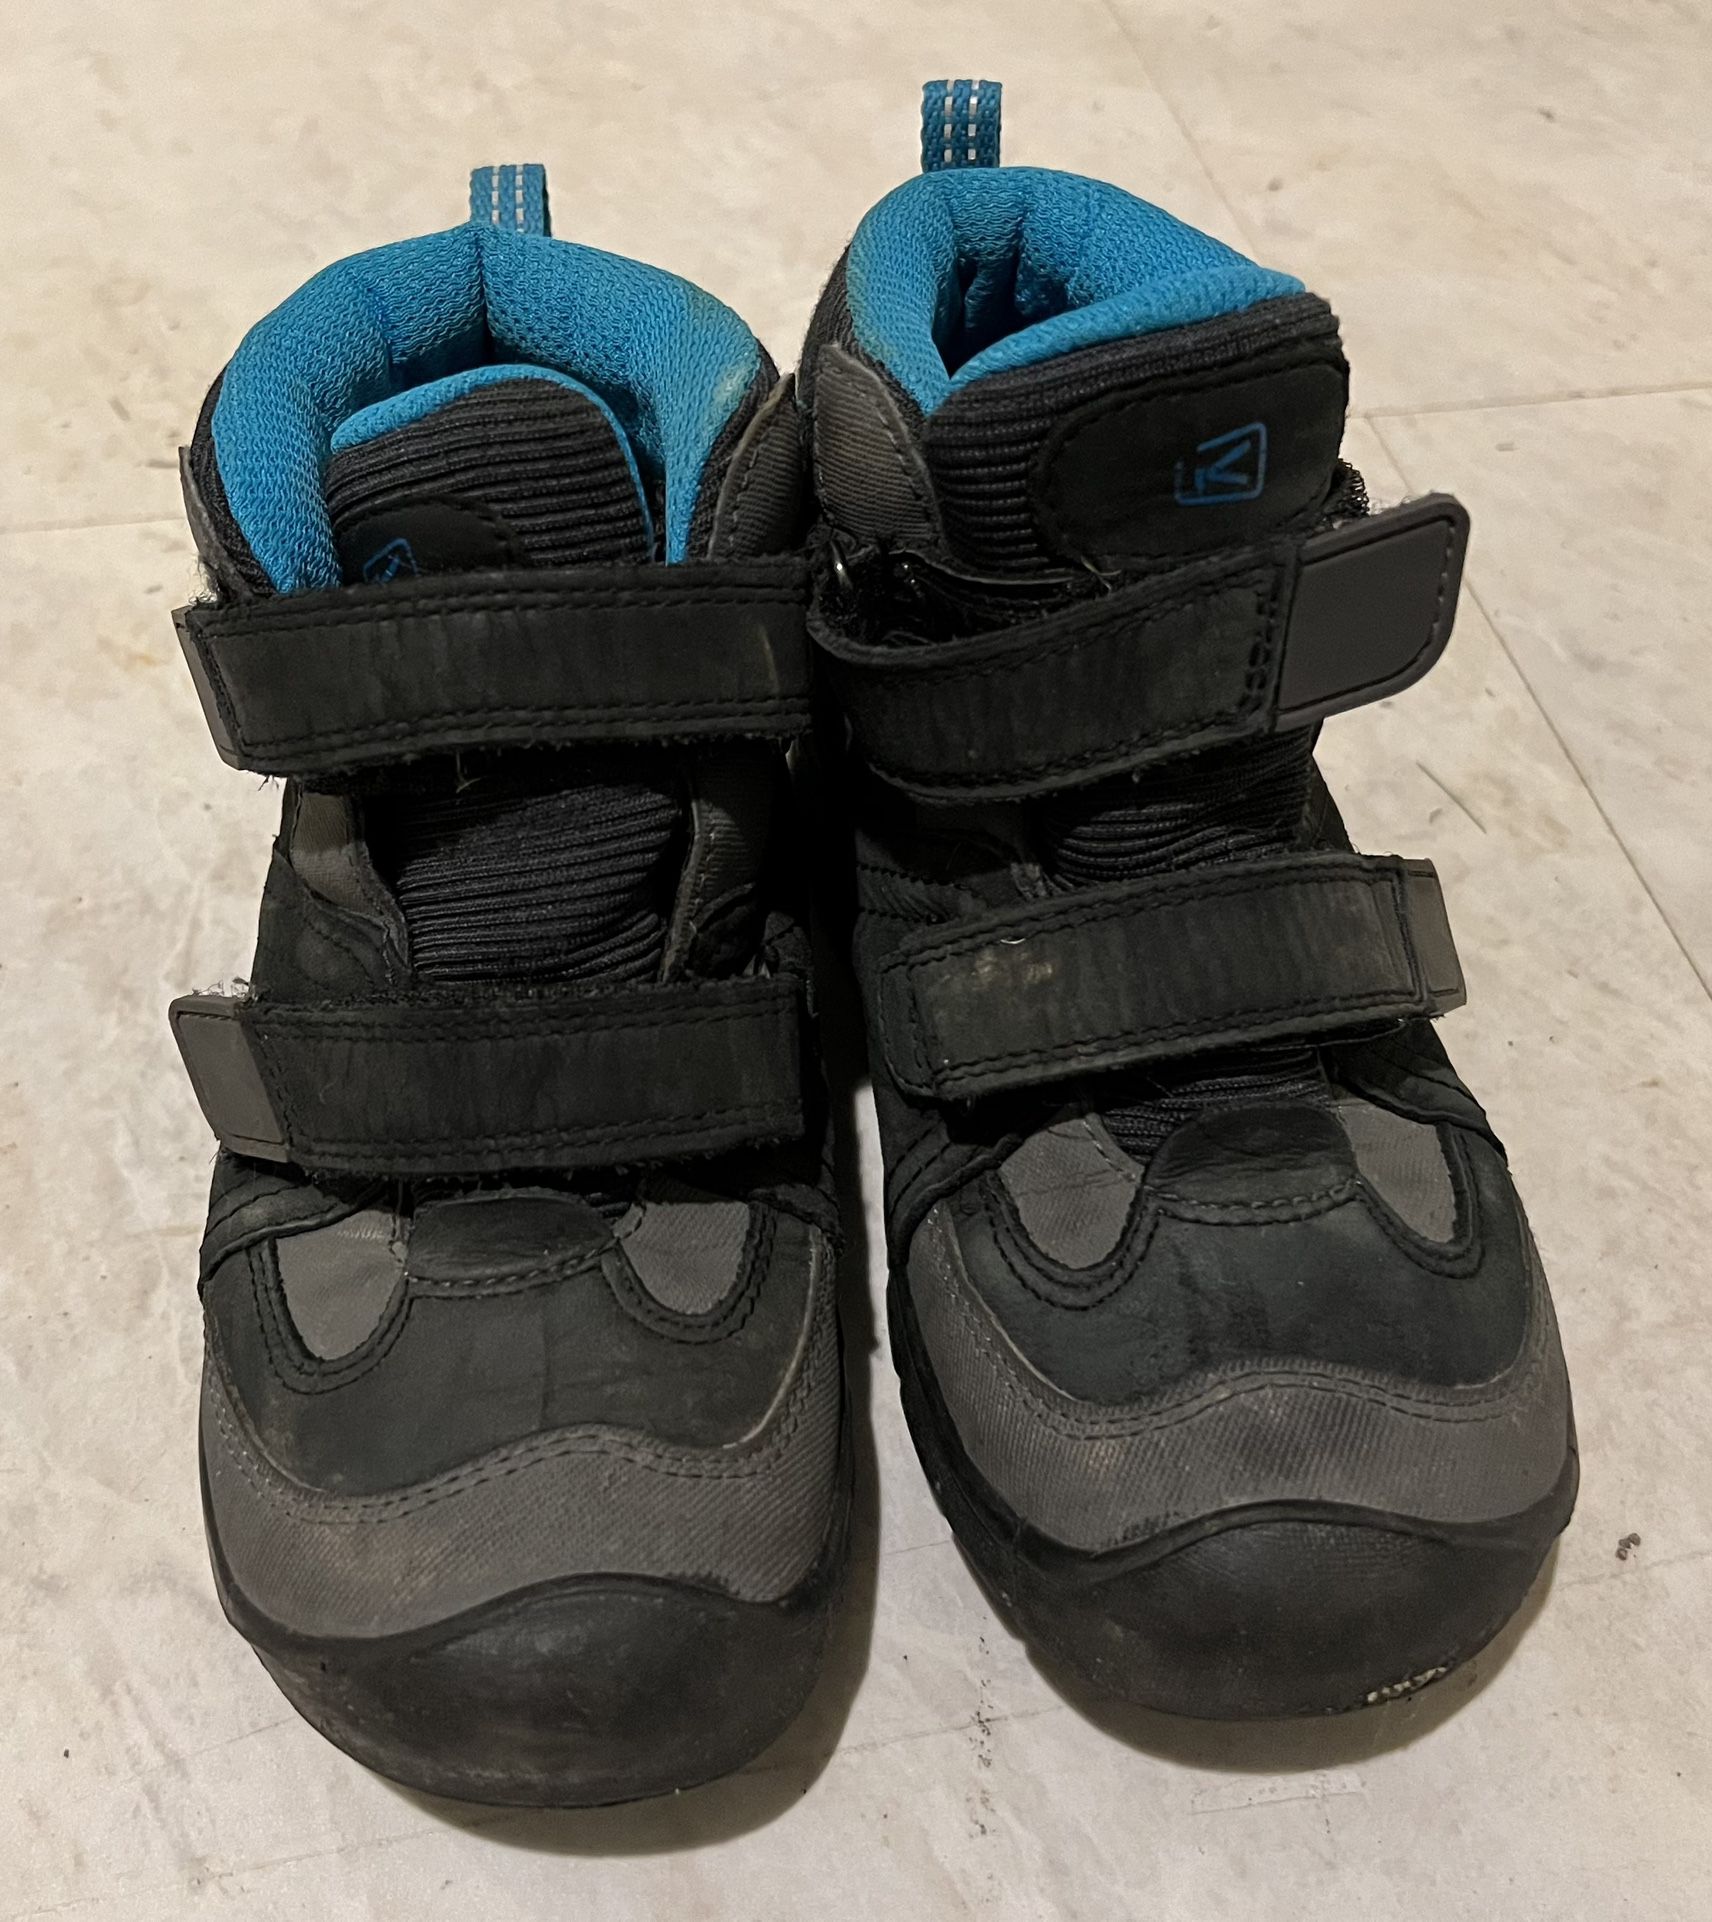 Bundle Of Boy Shoes And Boots, Size 11